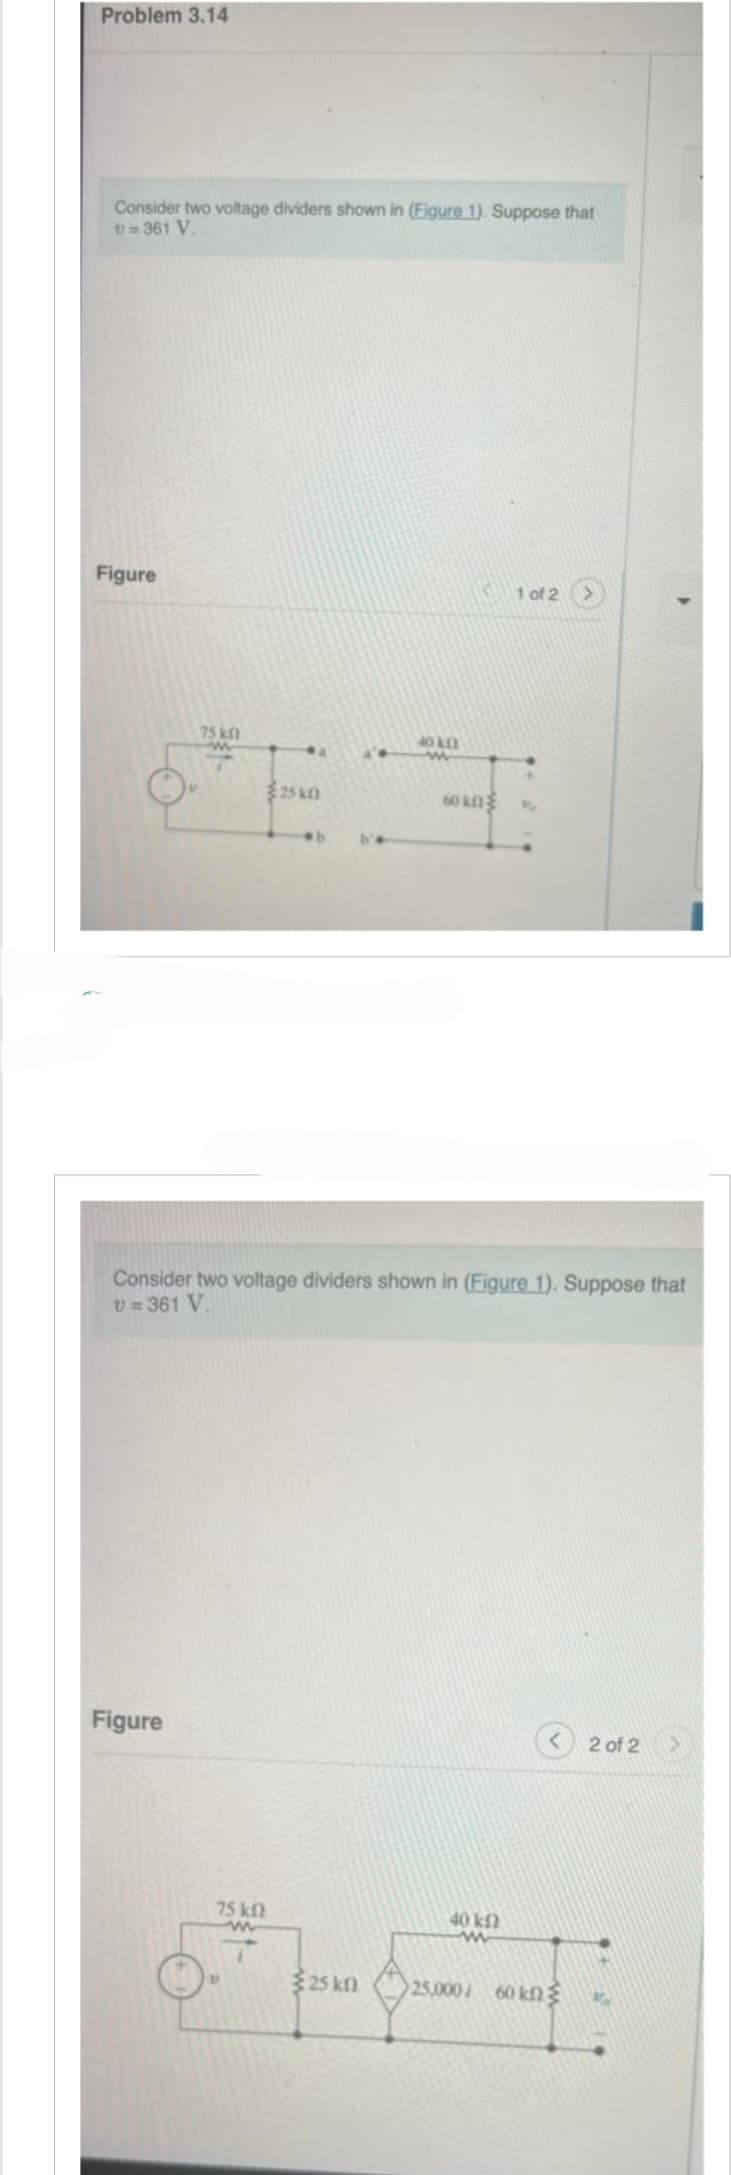 Problem 3.14
Consider two voltage dividers shown in (Figure 1). Suppose that
v=361 V.
Figure
75 k
w
Figure
a
75 kn
25k0
b'e
25 kn
40 kn
Consider two voltage dividers shown in (Figure 1). Suppose that
V=361 V.
60 kn
1 of 2
40 ΚΩ
www
25.000/60 ΚΩΣ
2 of 2
VA